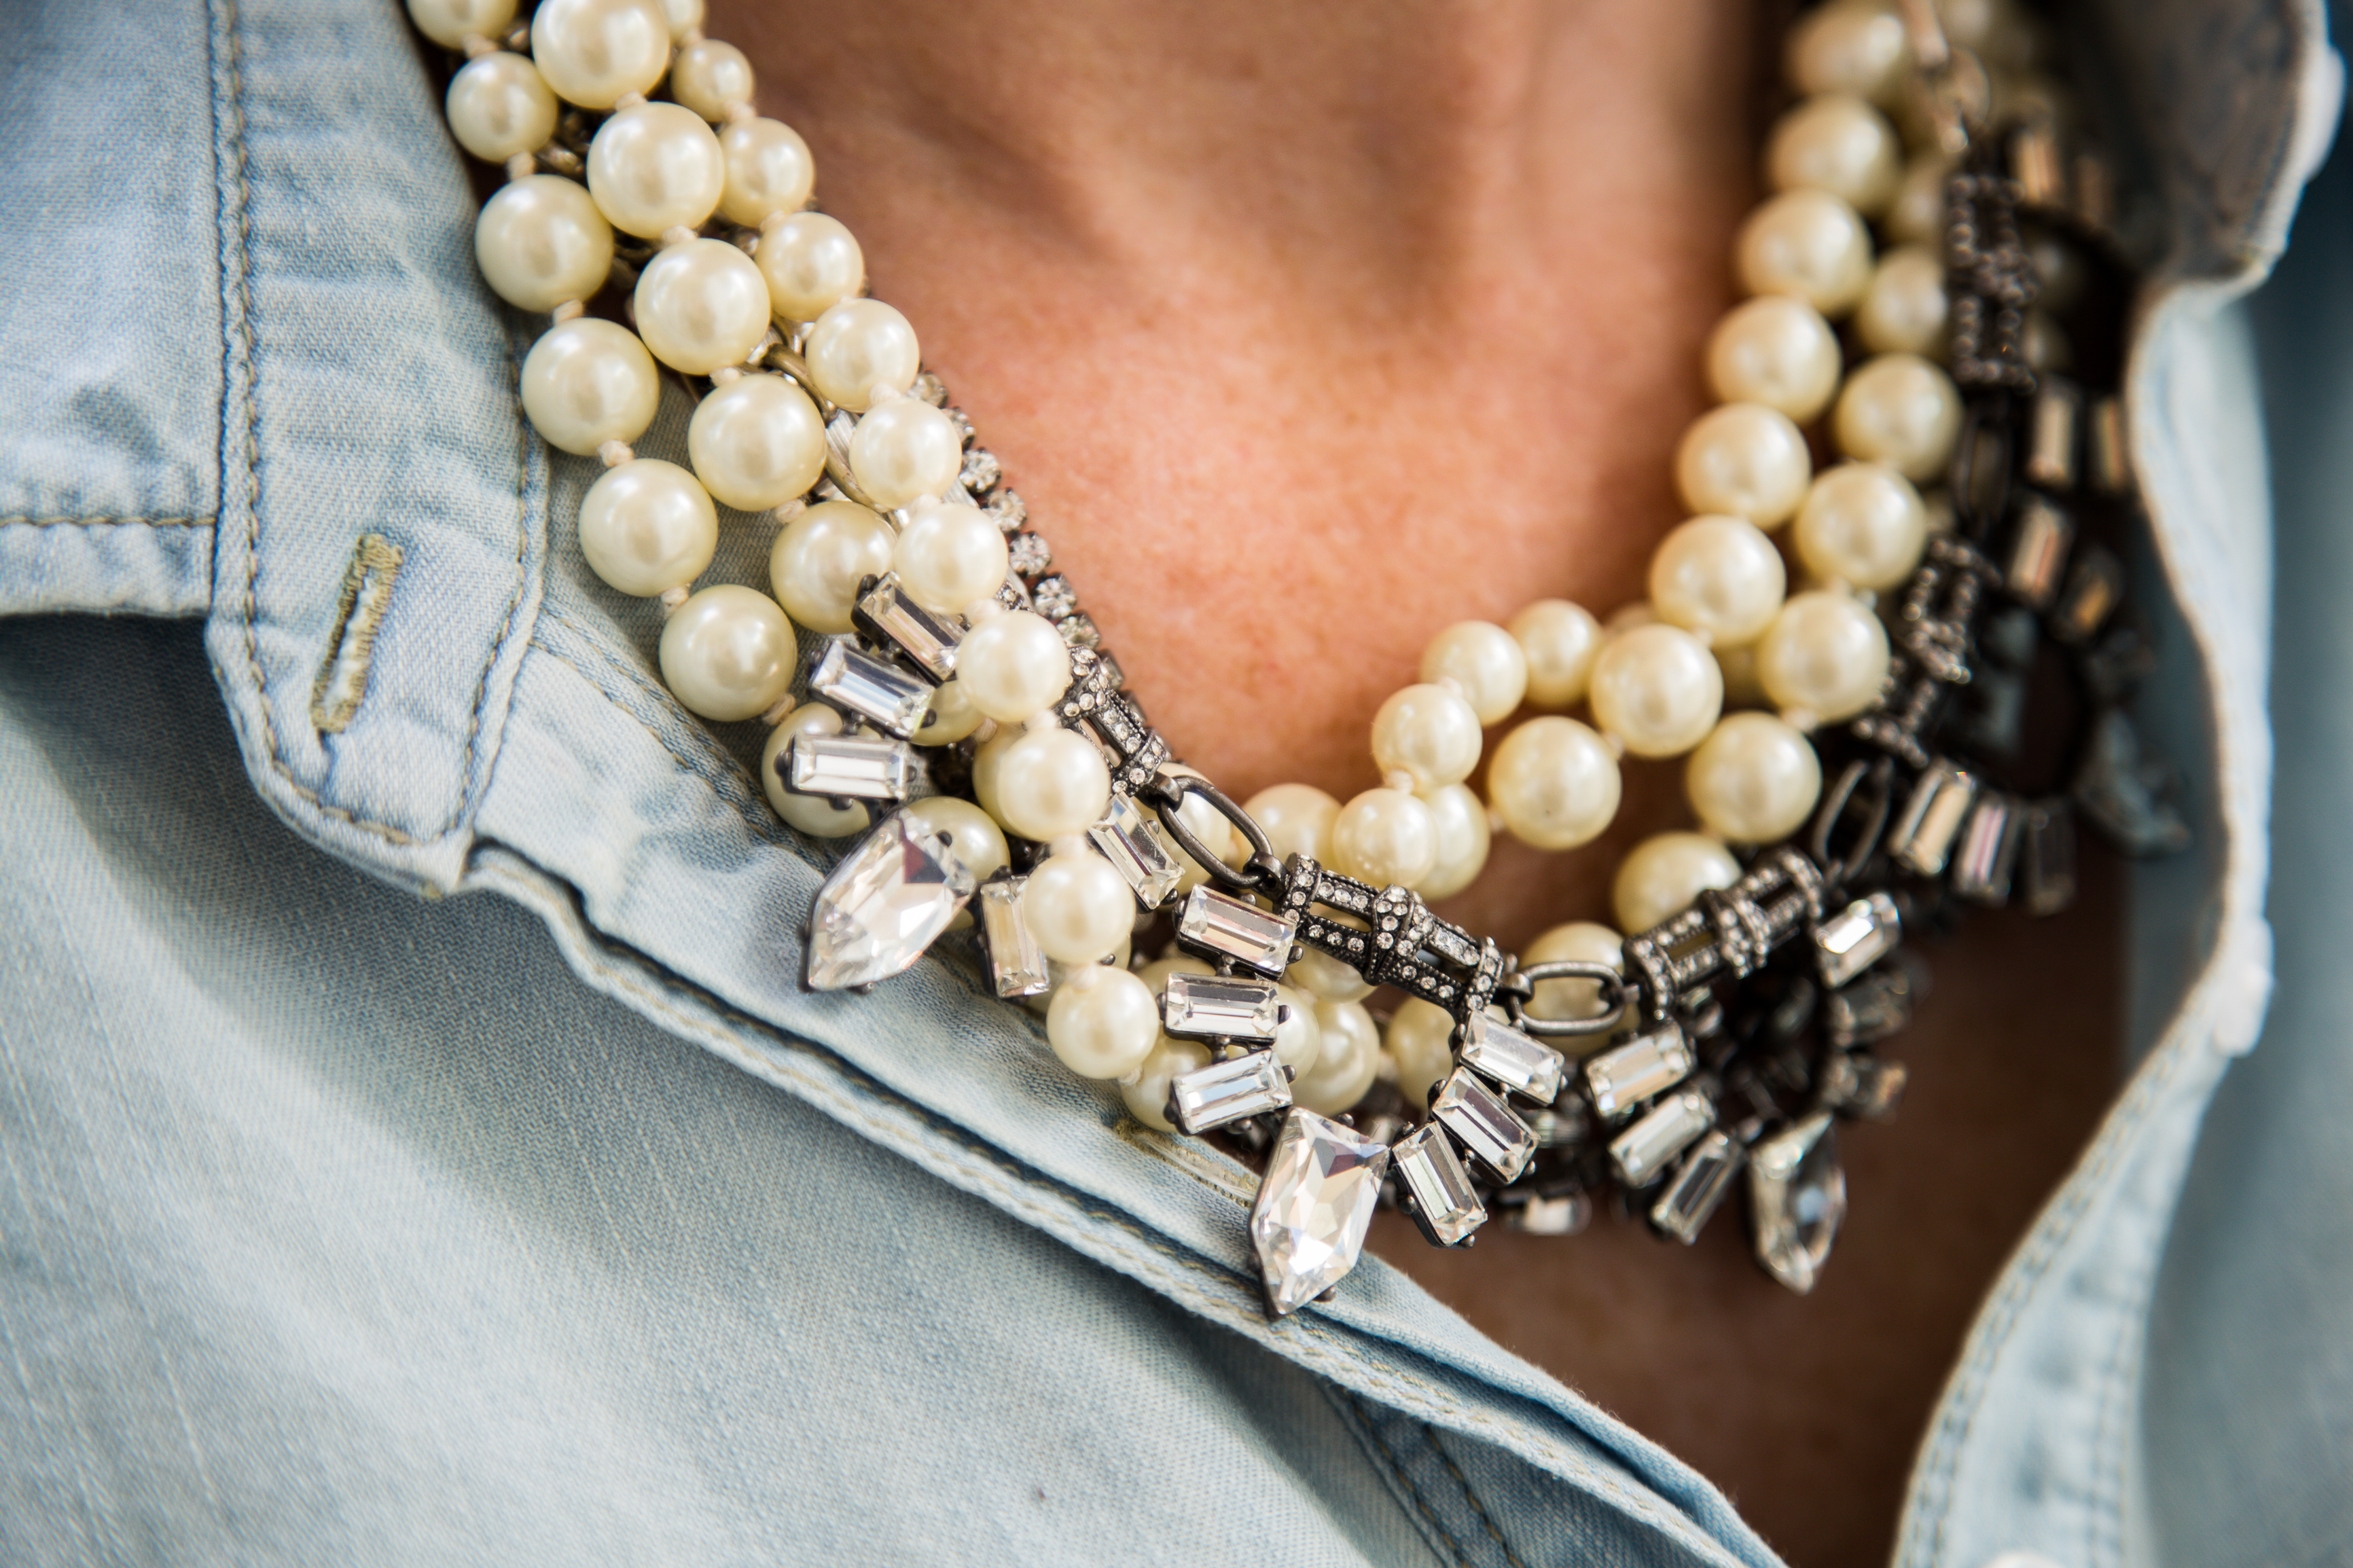 Starlet Pearl Necklace by www.whitecottagehomeandliving.com, Photos by Wish-6032-MLFH5.16